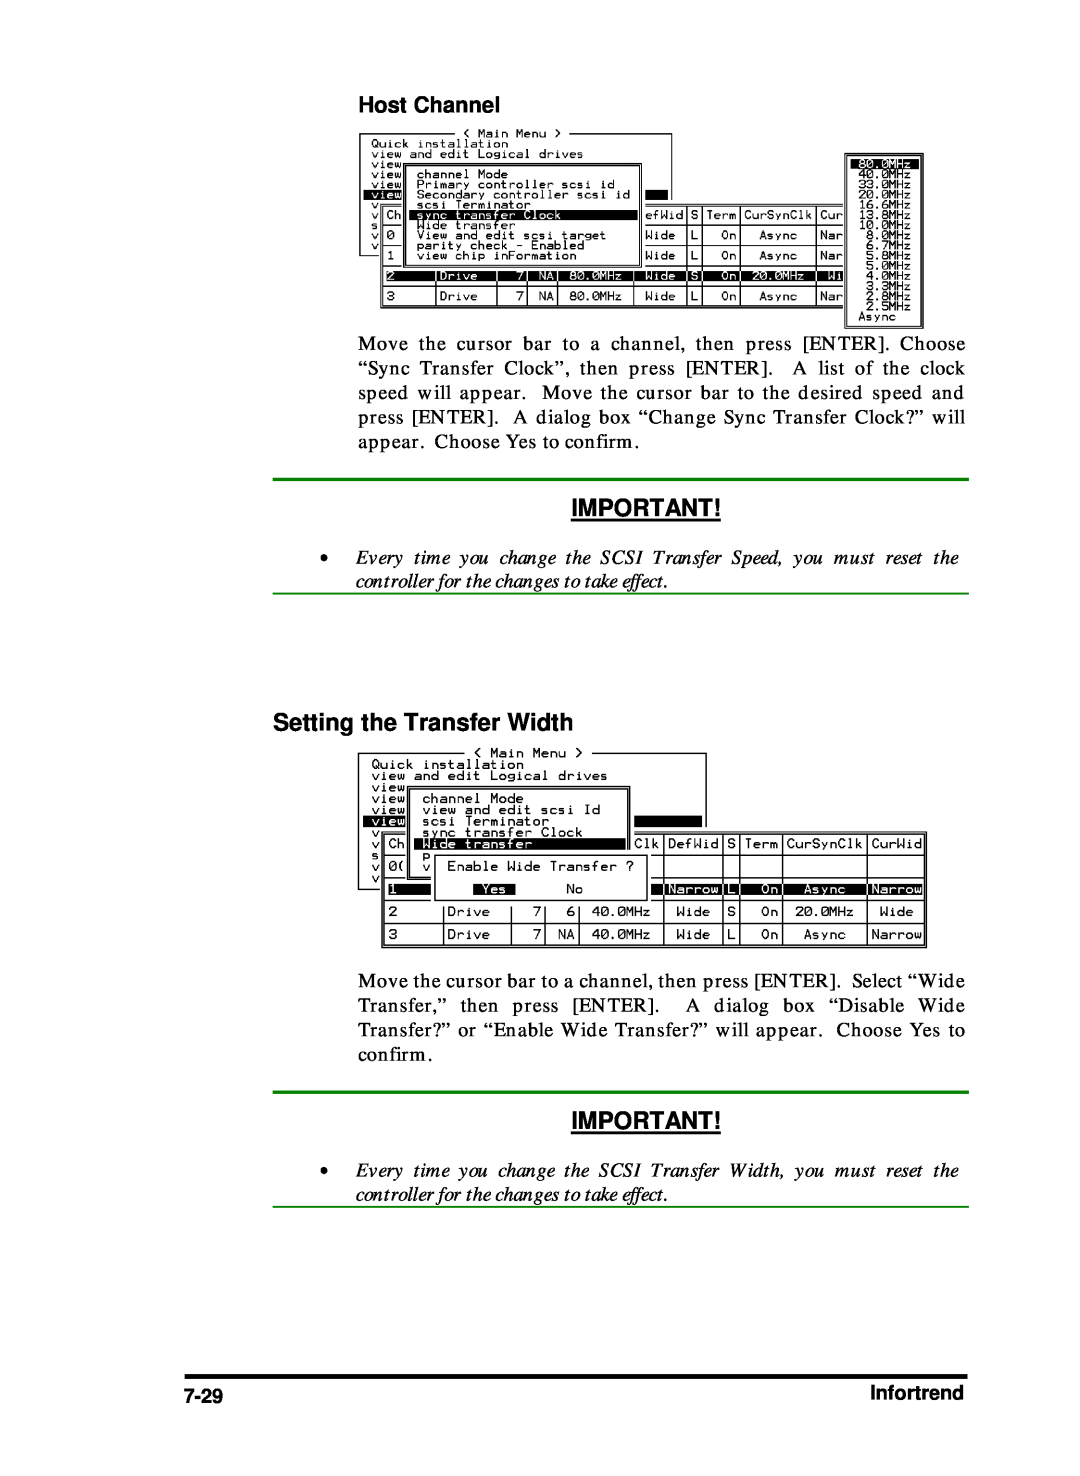 Compaq Infortrend manual Setting the Transfer Width, Host Channel 